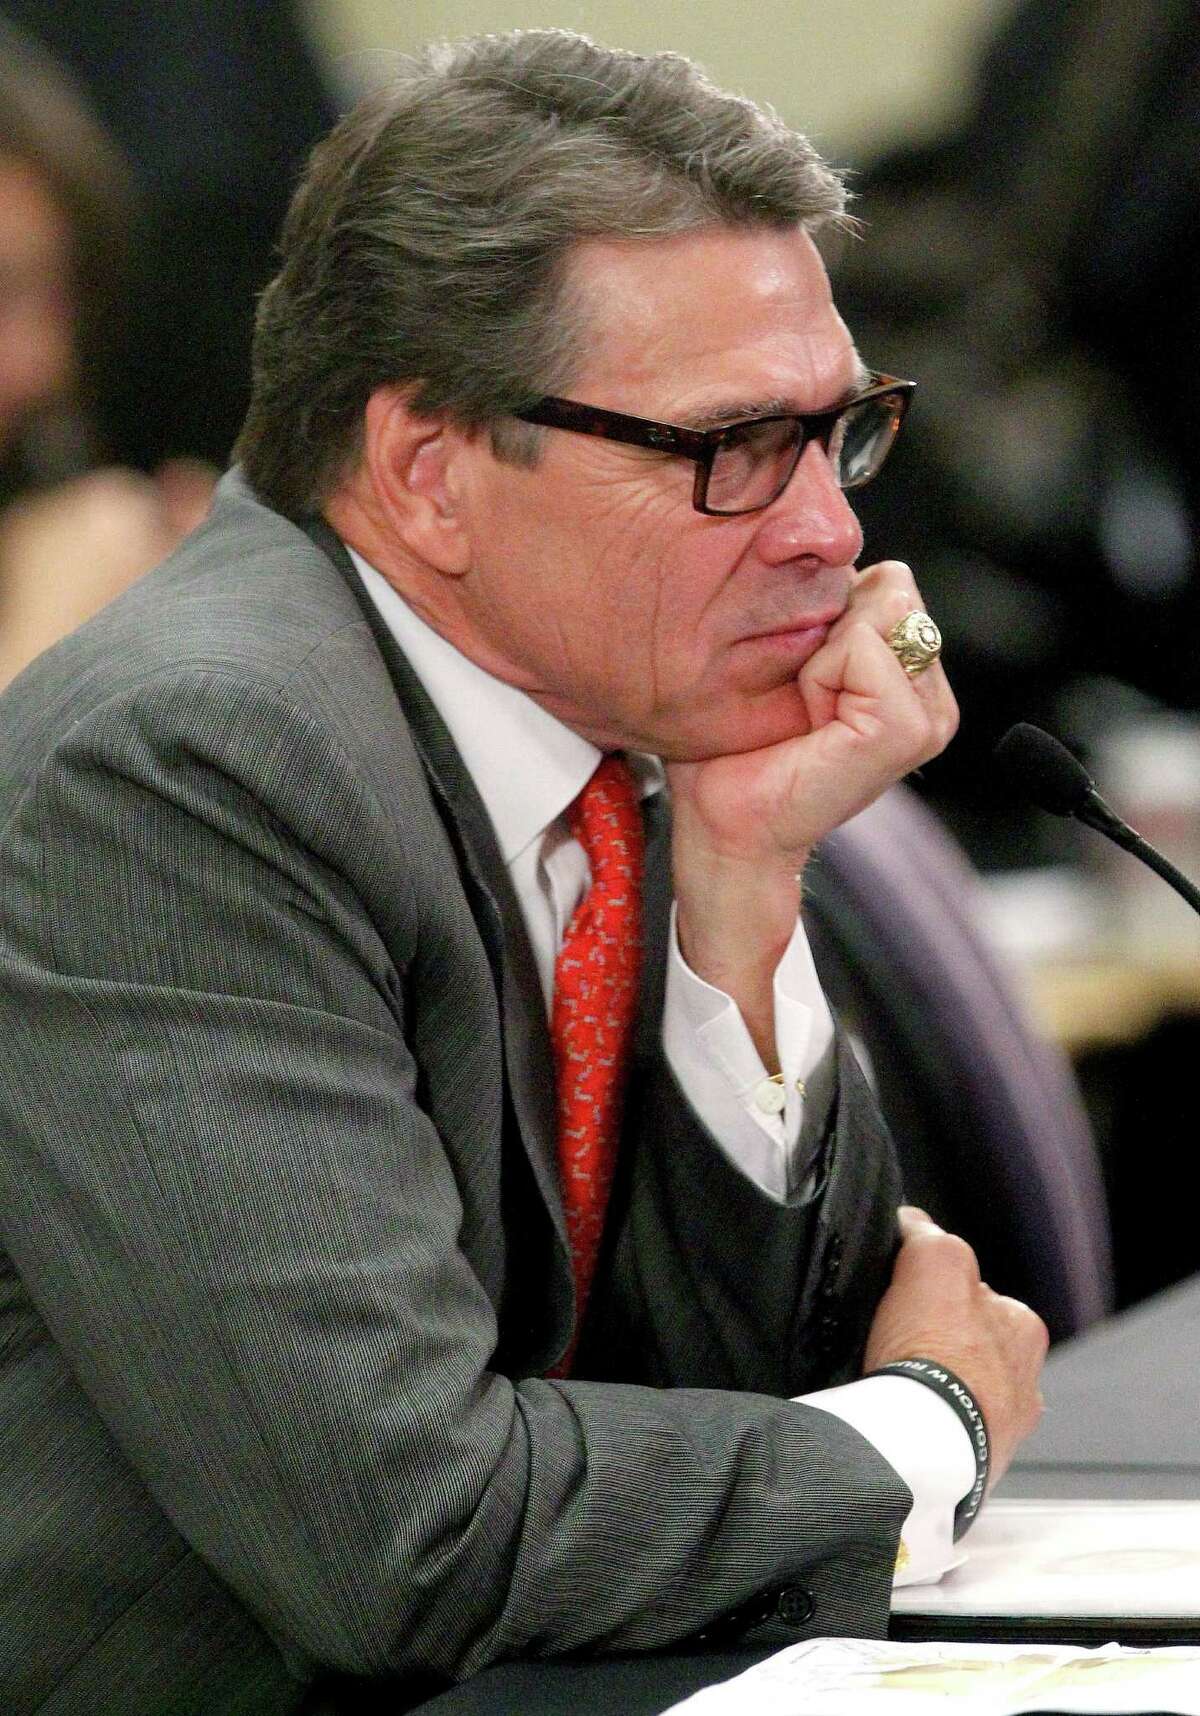 Texas Gov. Rick Perry listens to members of the U.S. House Committee on Homeland Security about the humanitarian and national security crises going on along the Texas-Mexico border Thursday July 3, 2014 in McAllen, Texas. Perry said that the tens of thousands of Central American children entering the U.S. illegally is both a humanitarian crisis and a national security one. (AP Photo/The Monitor, Gabe Hernandez) MAGS OUT; TV OUT